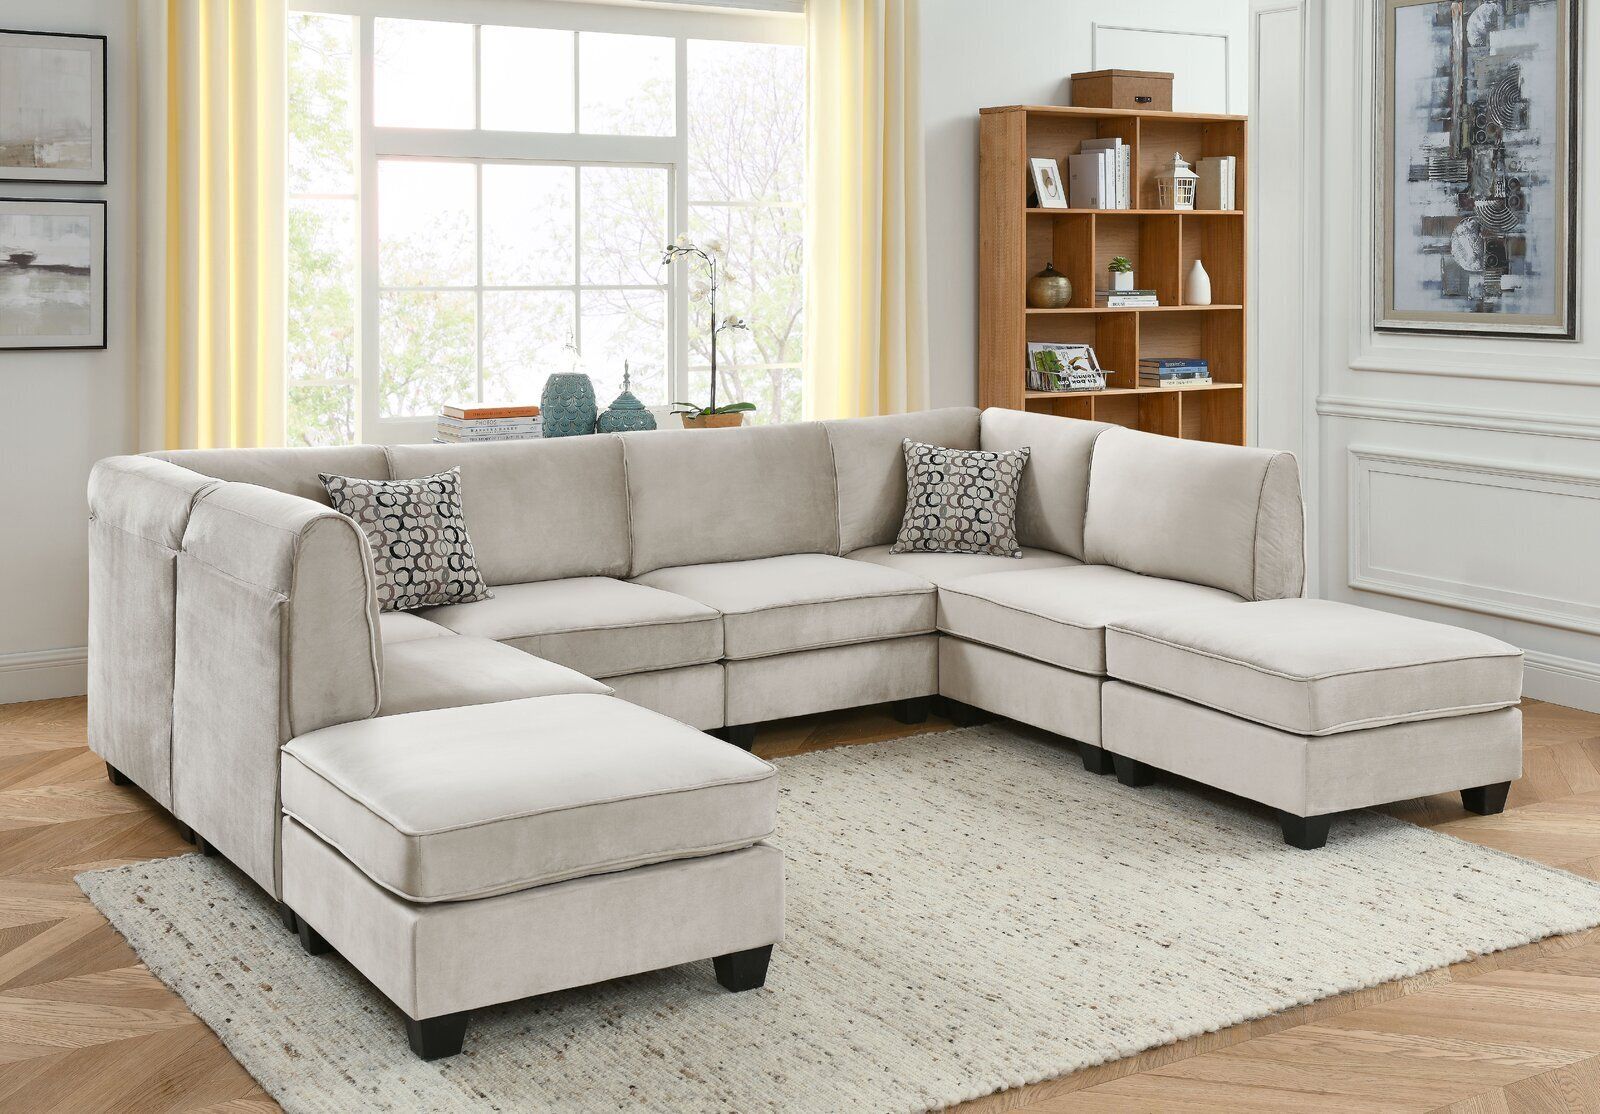 Sectional Sofa With Ottoman – Ideas On Foter Inside Sectional Sofas With Ottomans And Tufted Back Cushion (View 9 of 20)